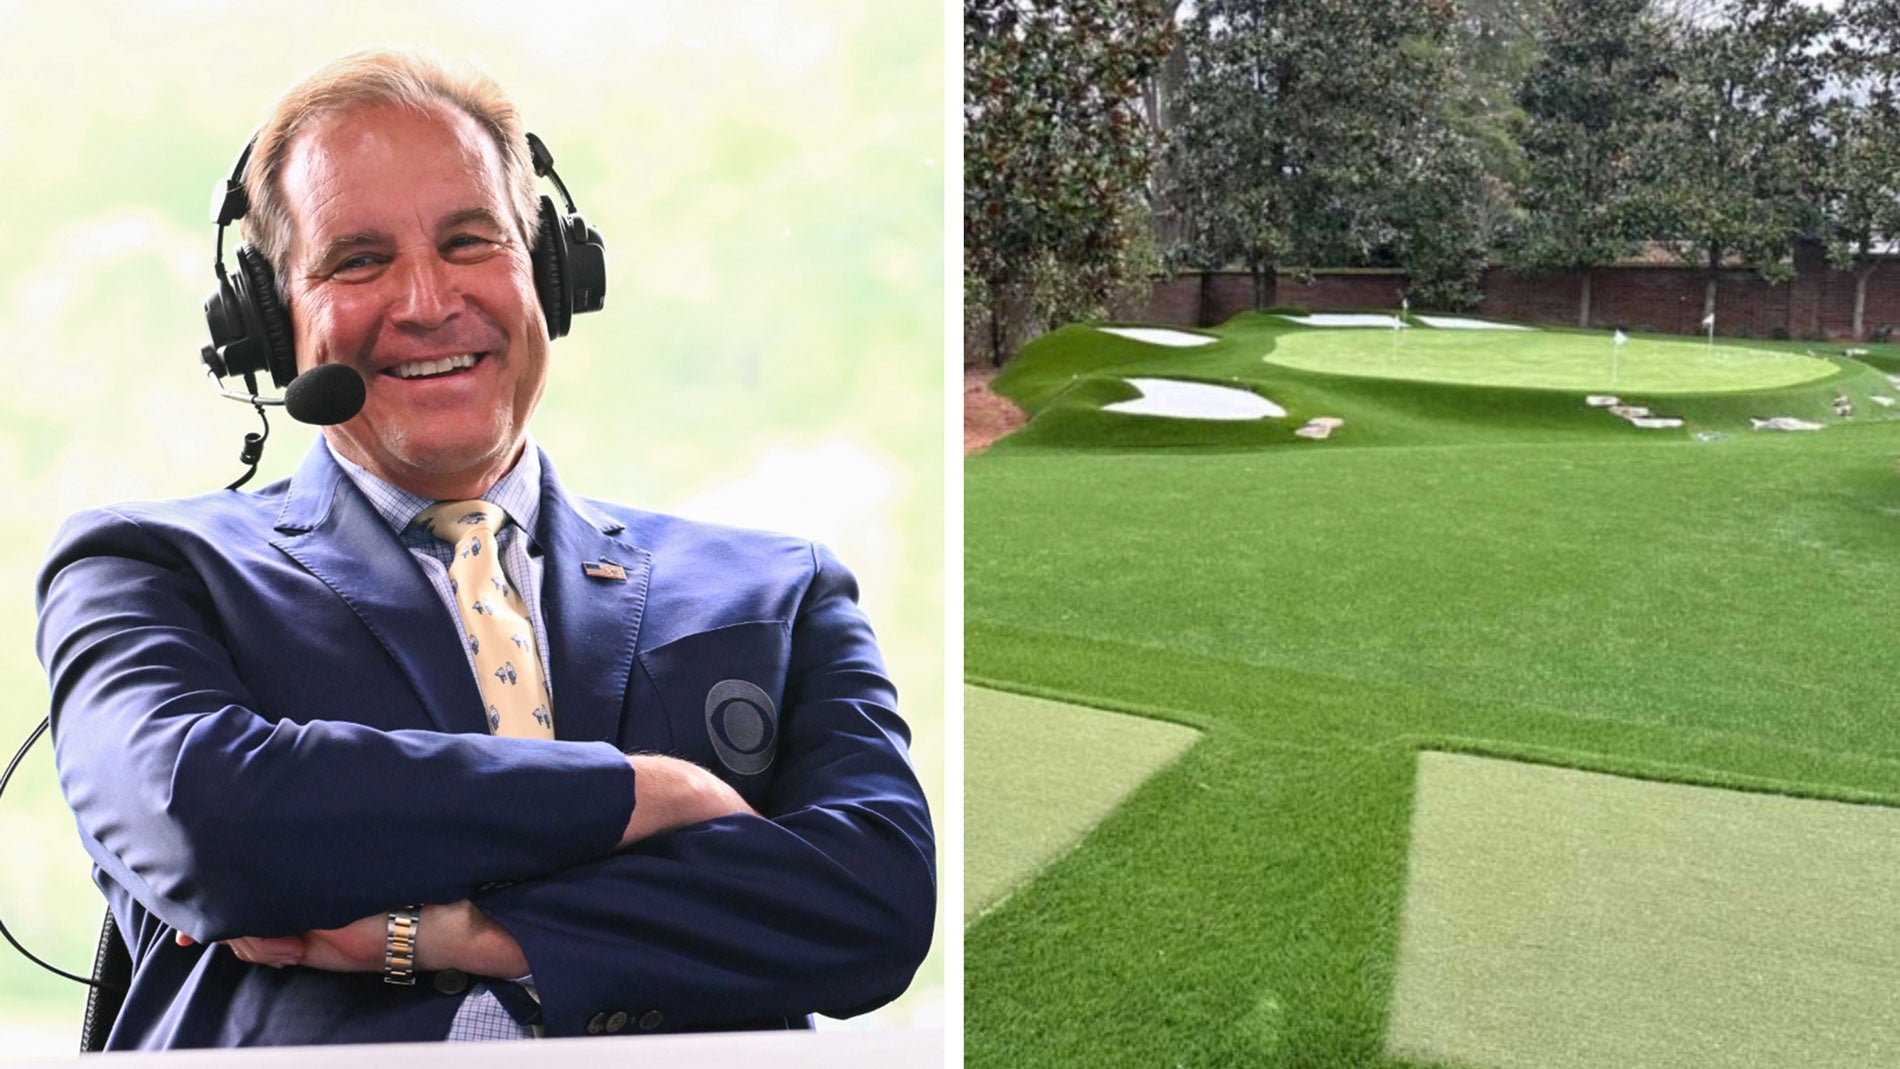 The replica 13th hole of Augusta National in the backyard of Jim Nantz.